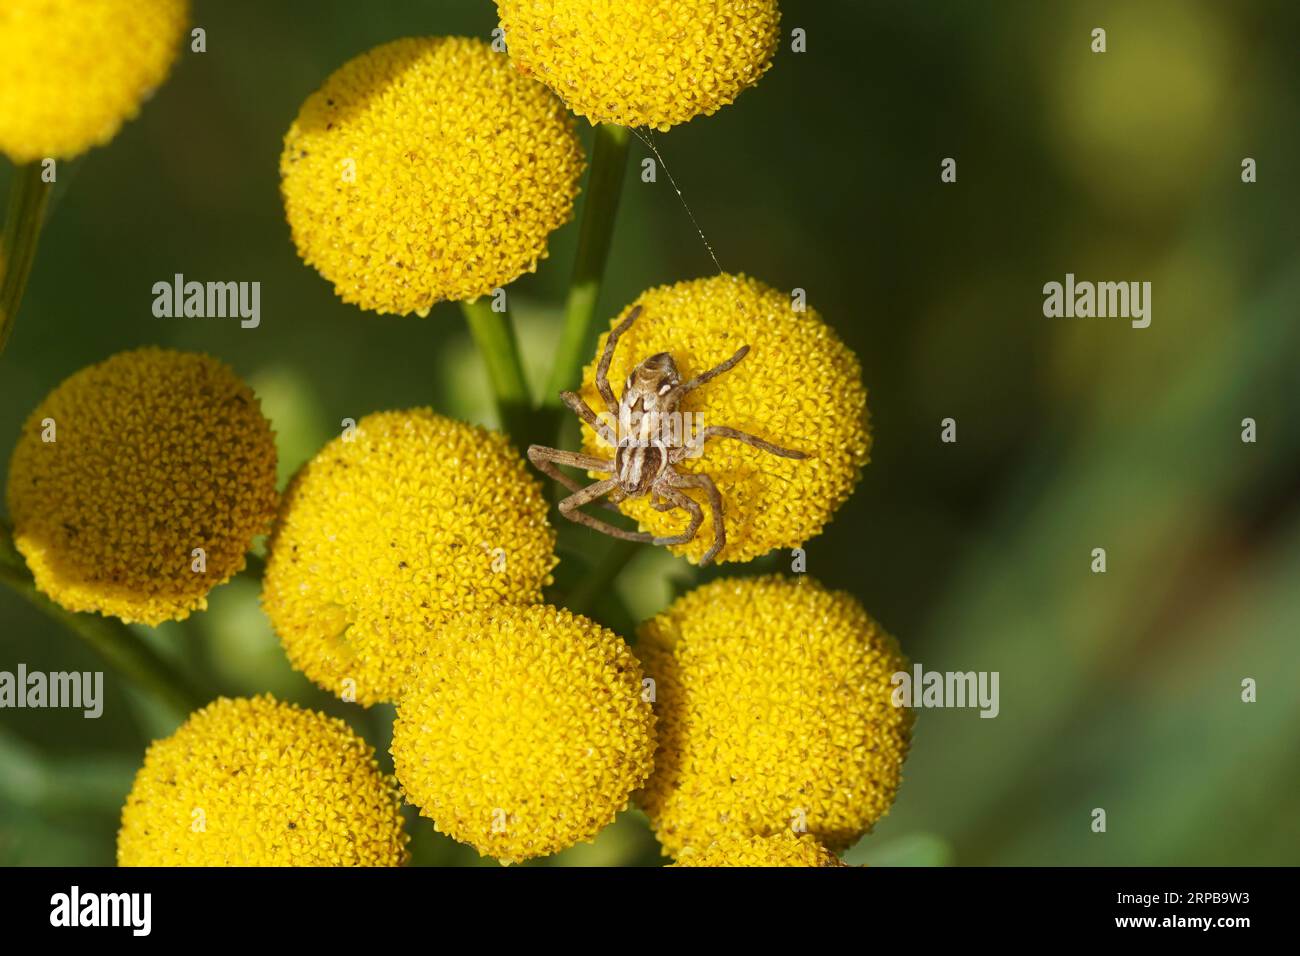 A running crab spider Rhysodromus histrio, family Philodromidae on flowers of Tansy (Tanacetum vulgare). Family Asteraceae. Netherlands, Late summer, Stock Photo